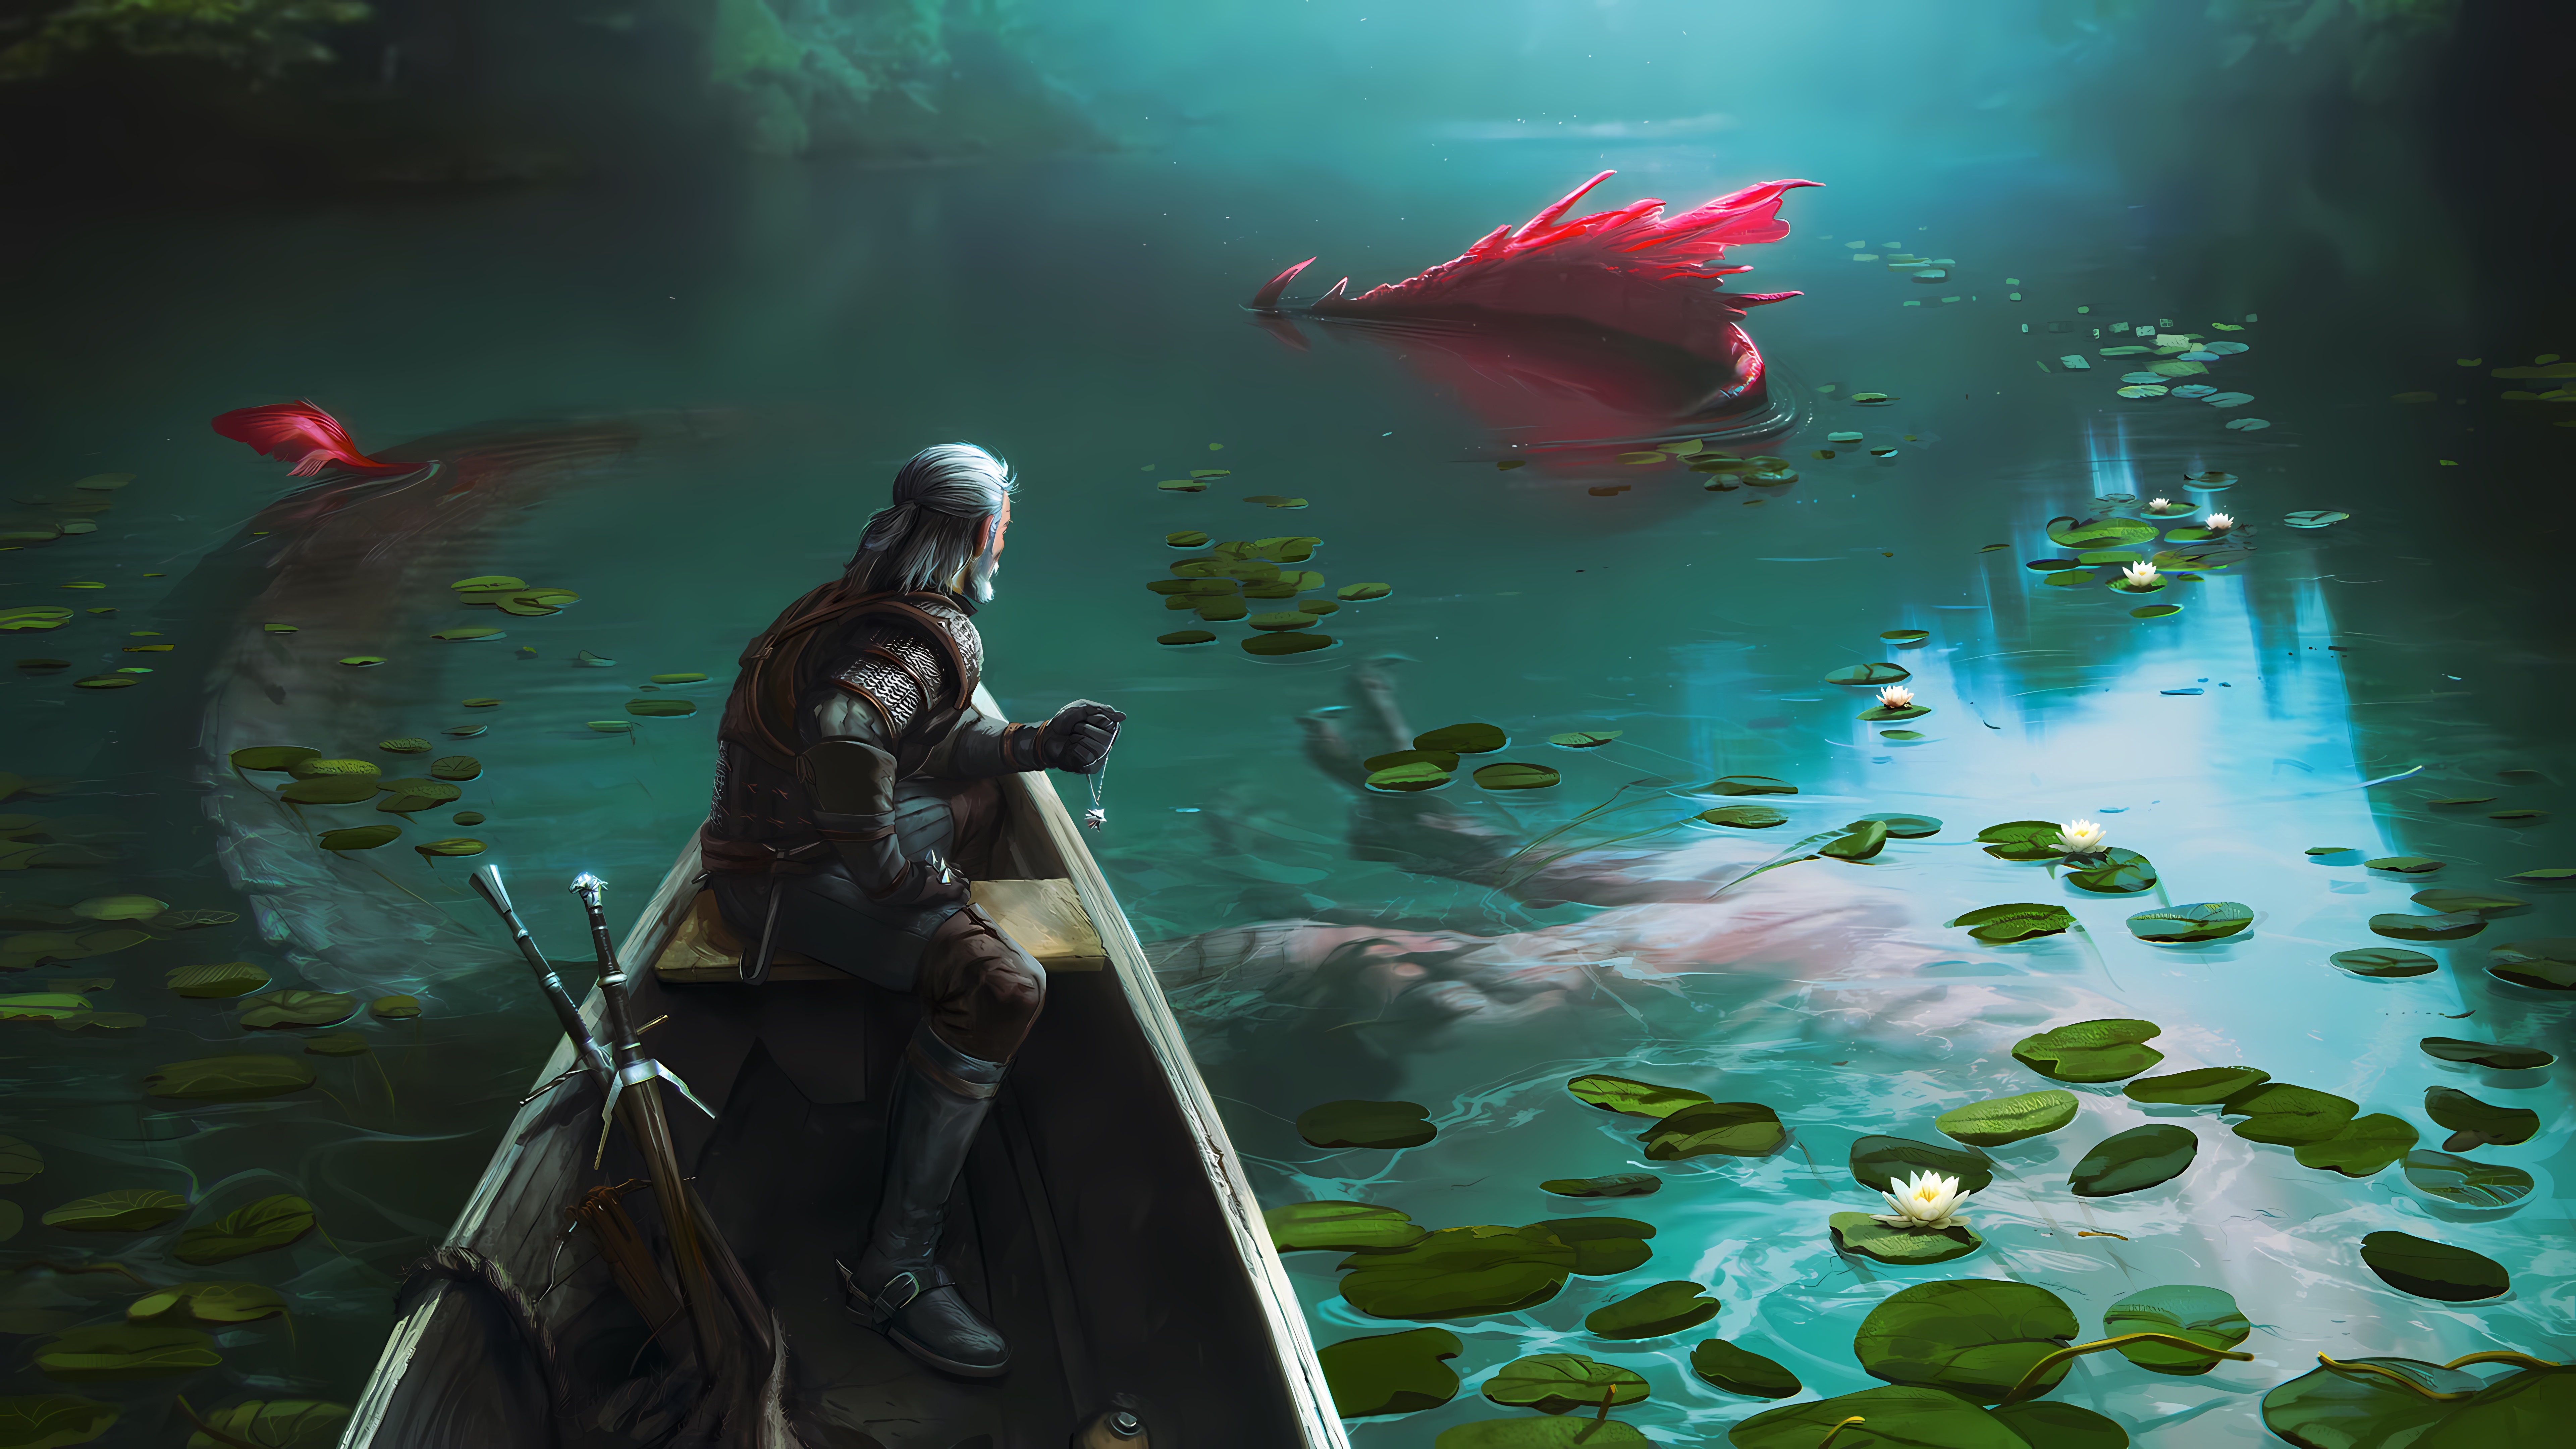 General 7680x4320 ArtStation The Witcher Geralt of Rivia video games PC gaming video game art fantasy art video game men fantasy men creature boat sword artwork water water lilies